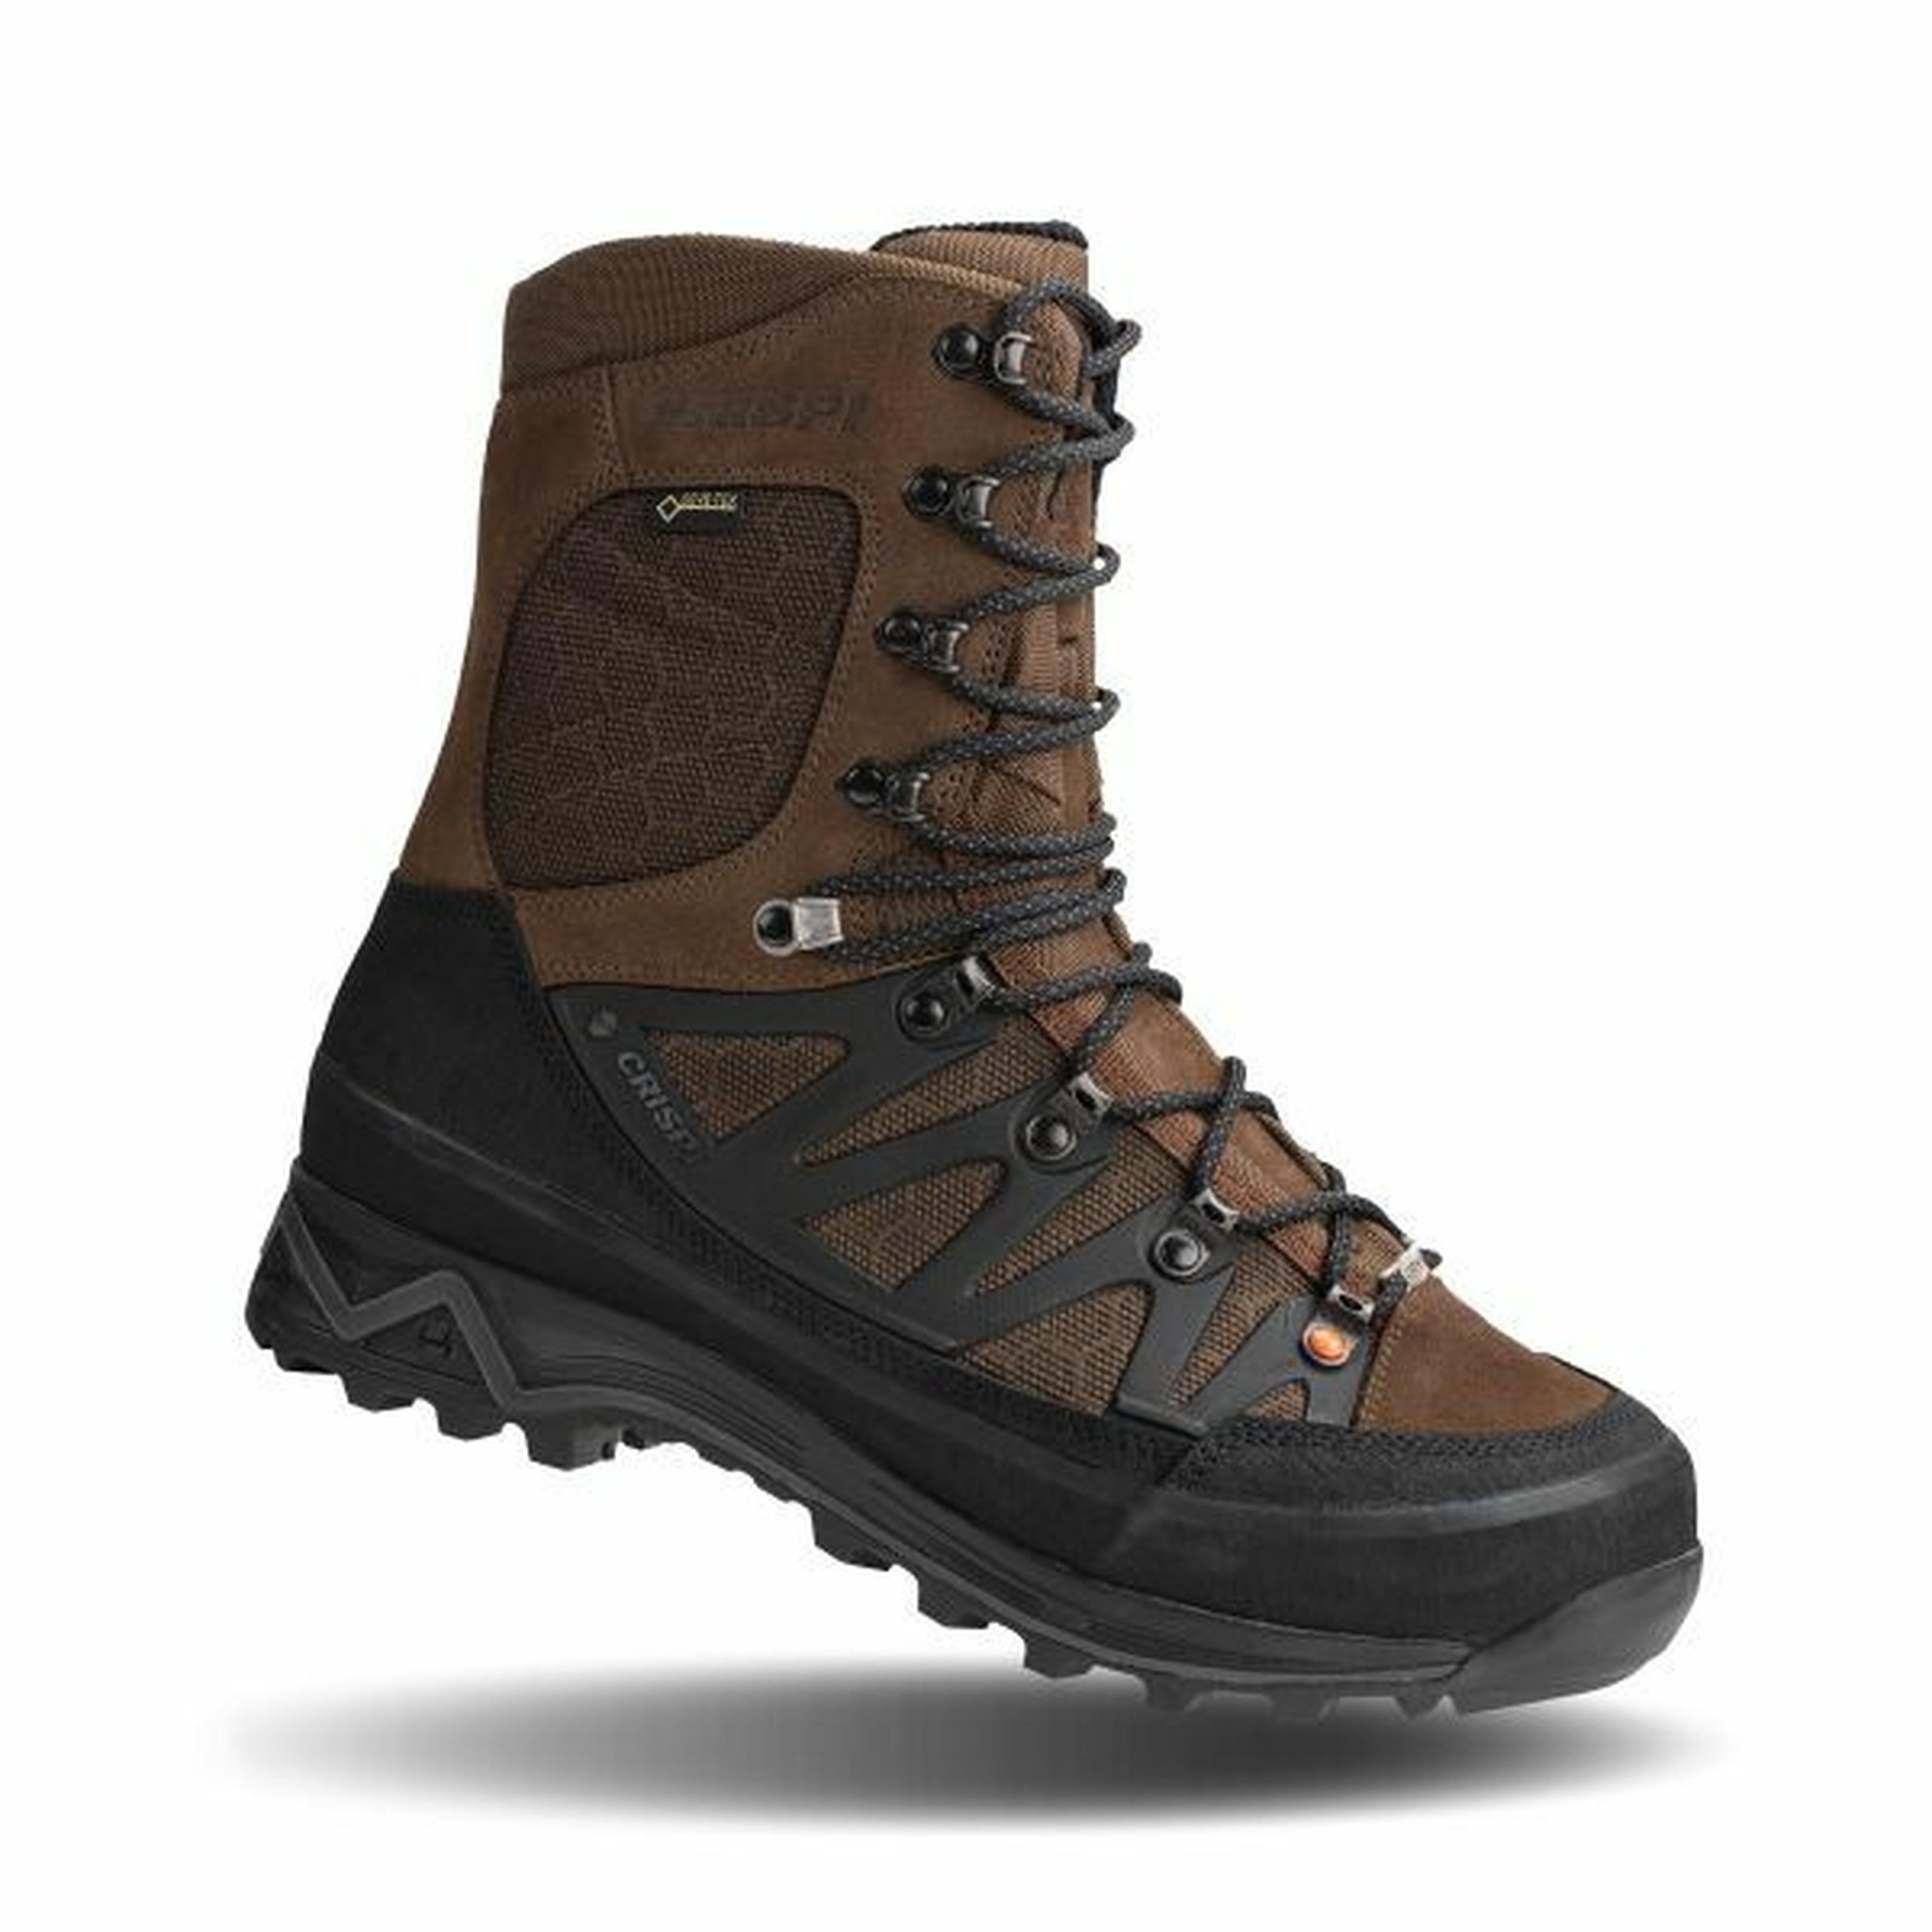 Crispi IDAHO II GTX Non-Insulated Hunting Boot In Store Only